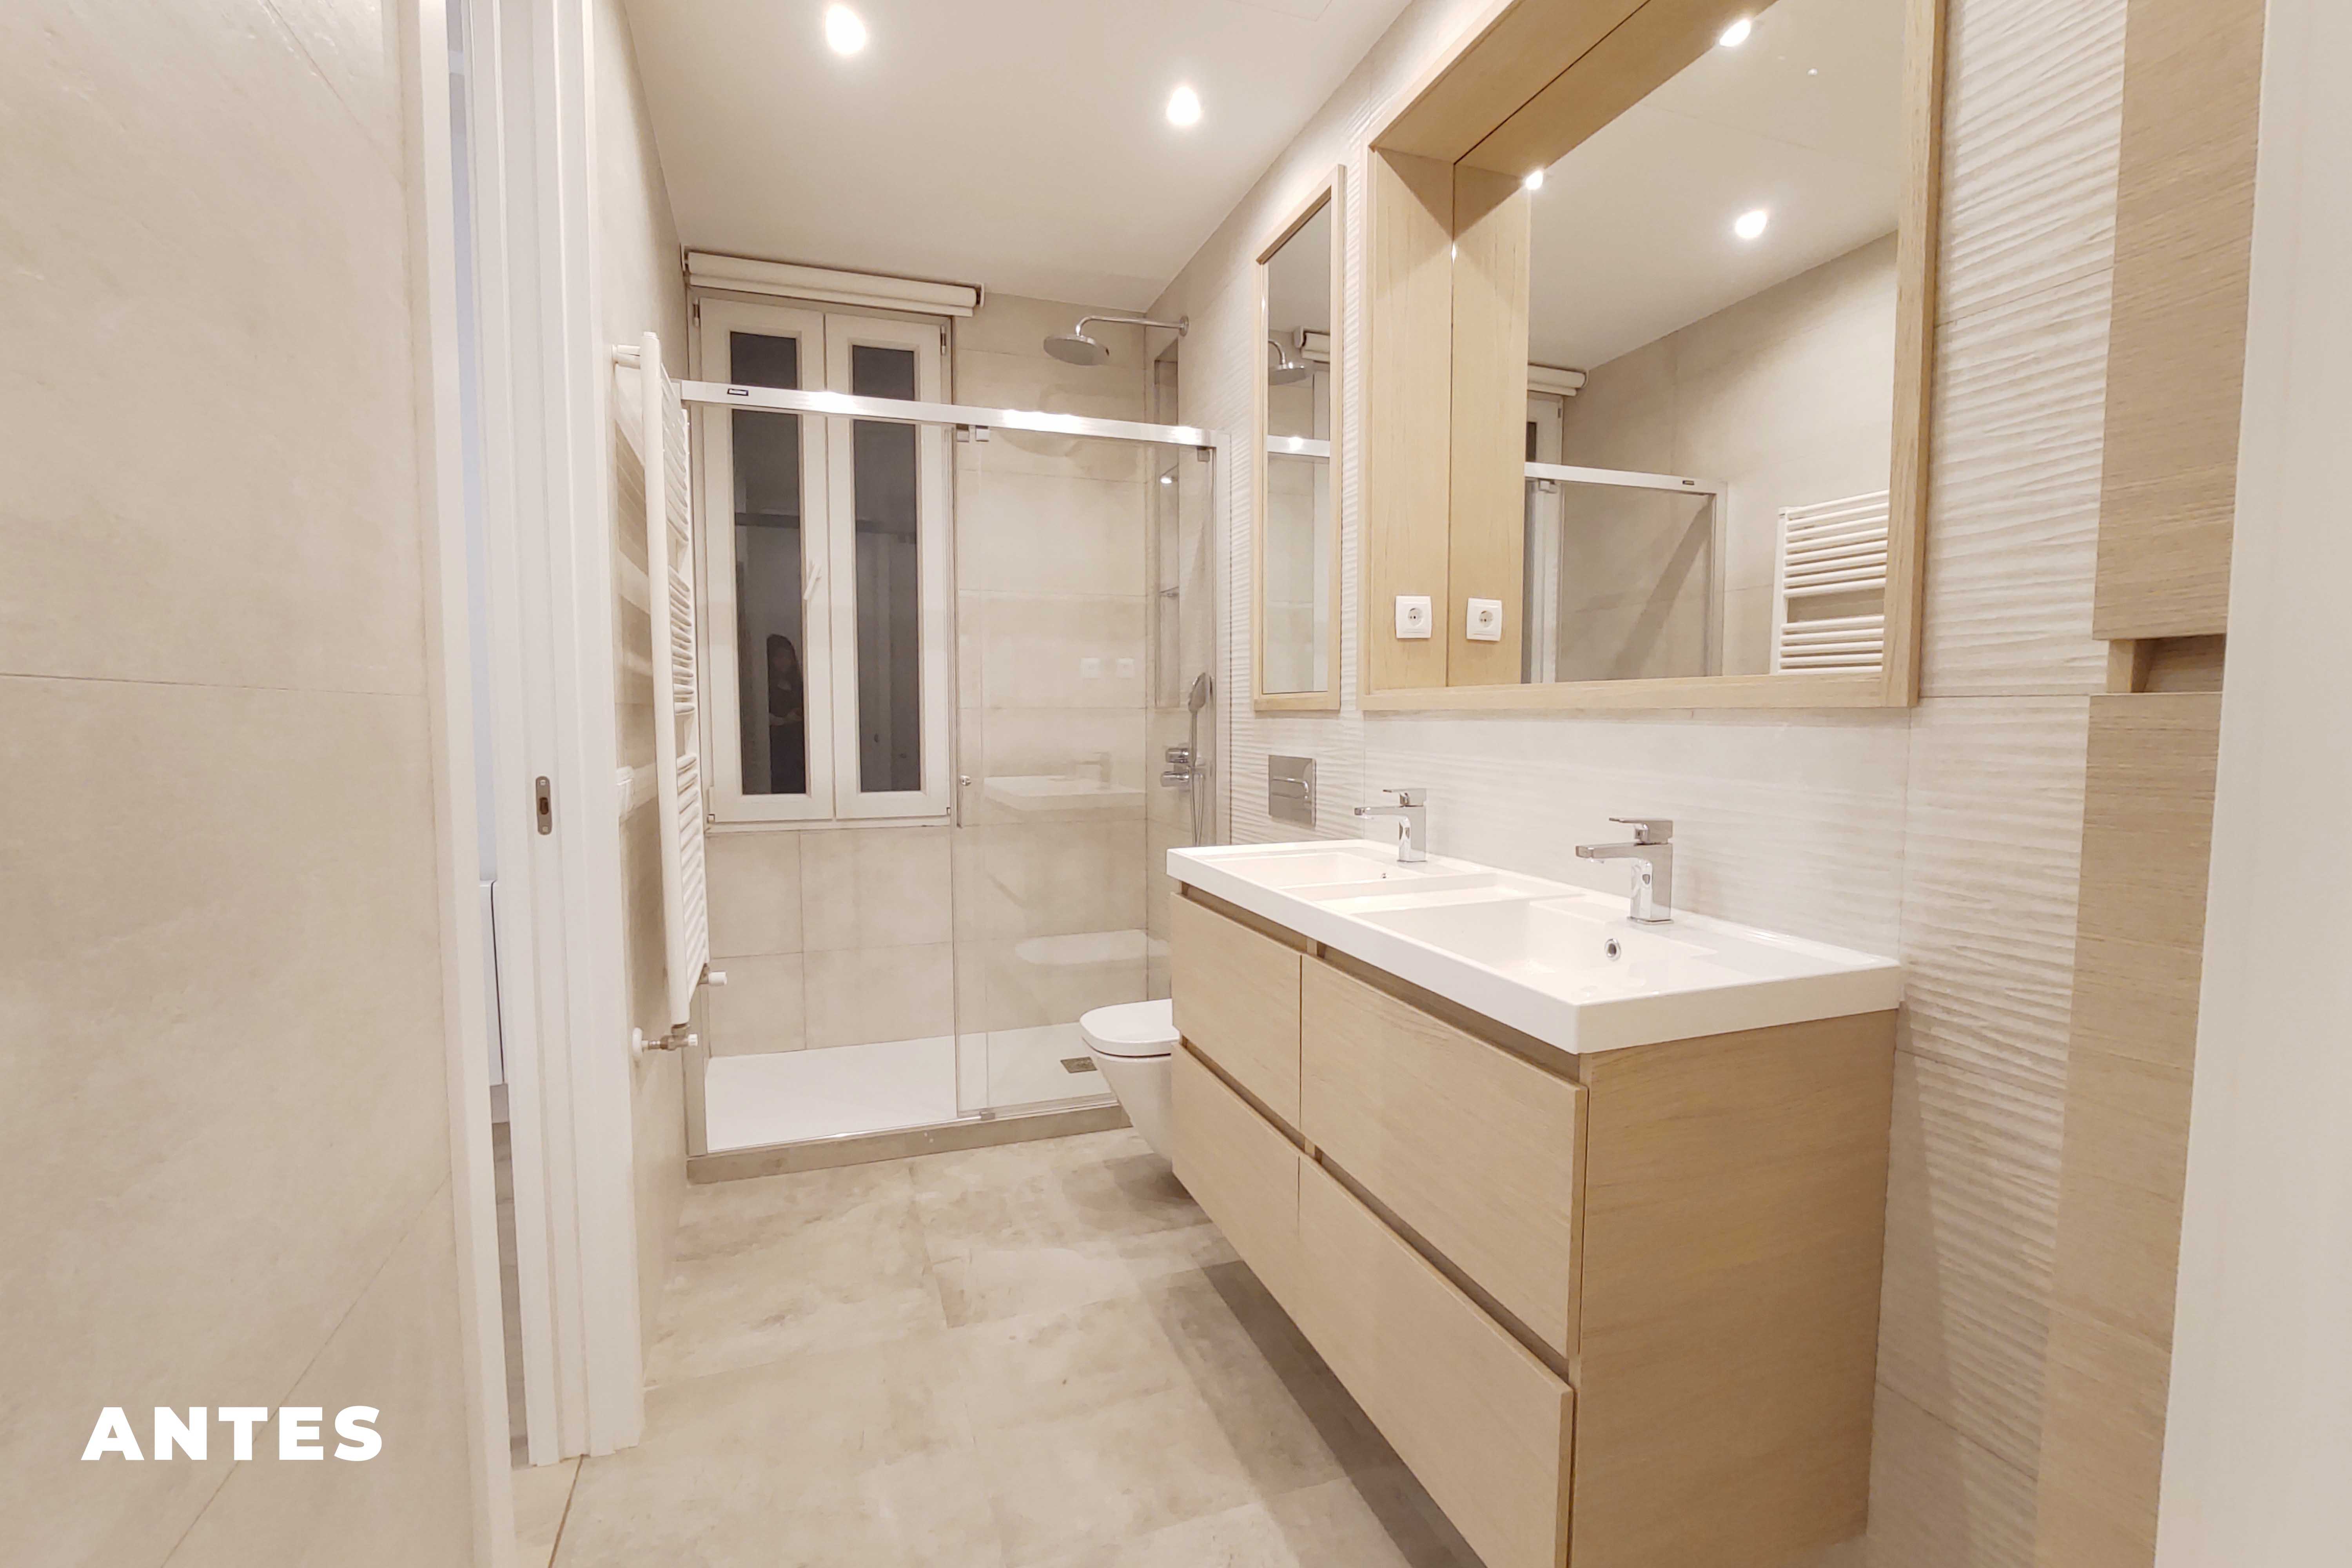 Antes Home Staging - baño